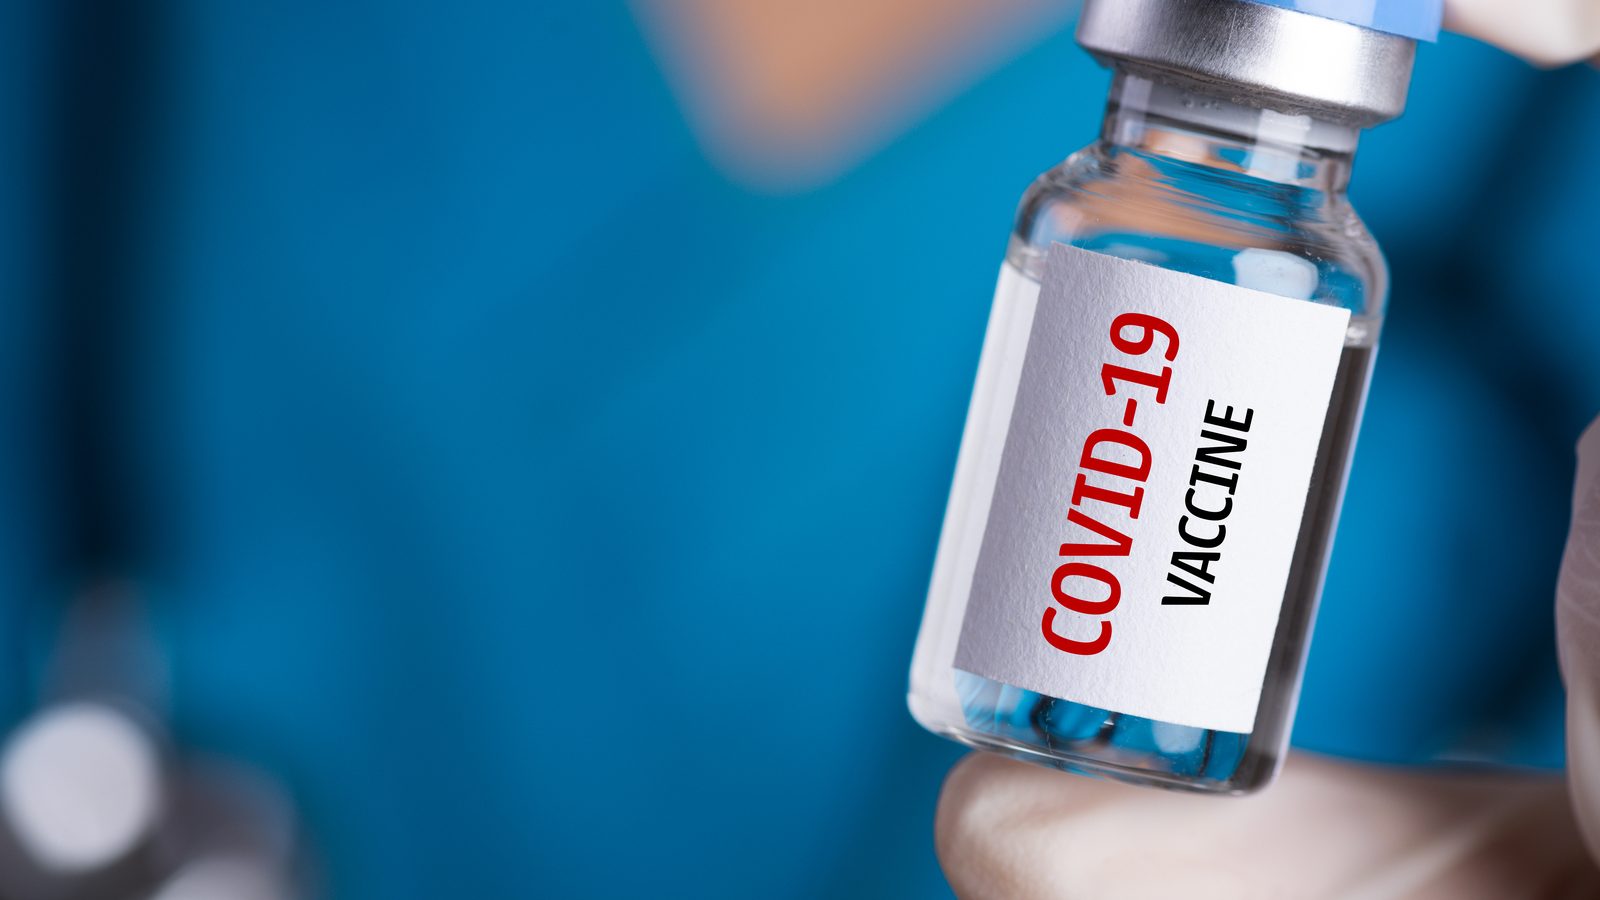 USAID trains stakeholders to be COVID-19 vaccine myth busters? 